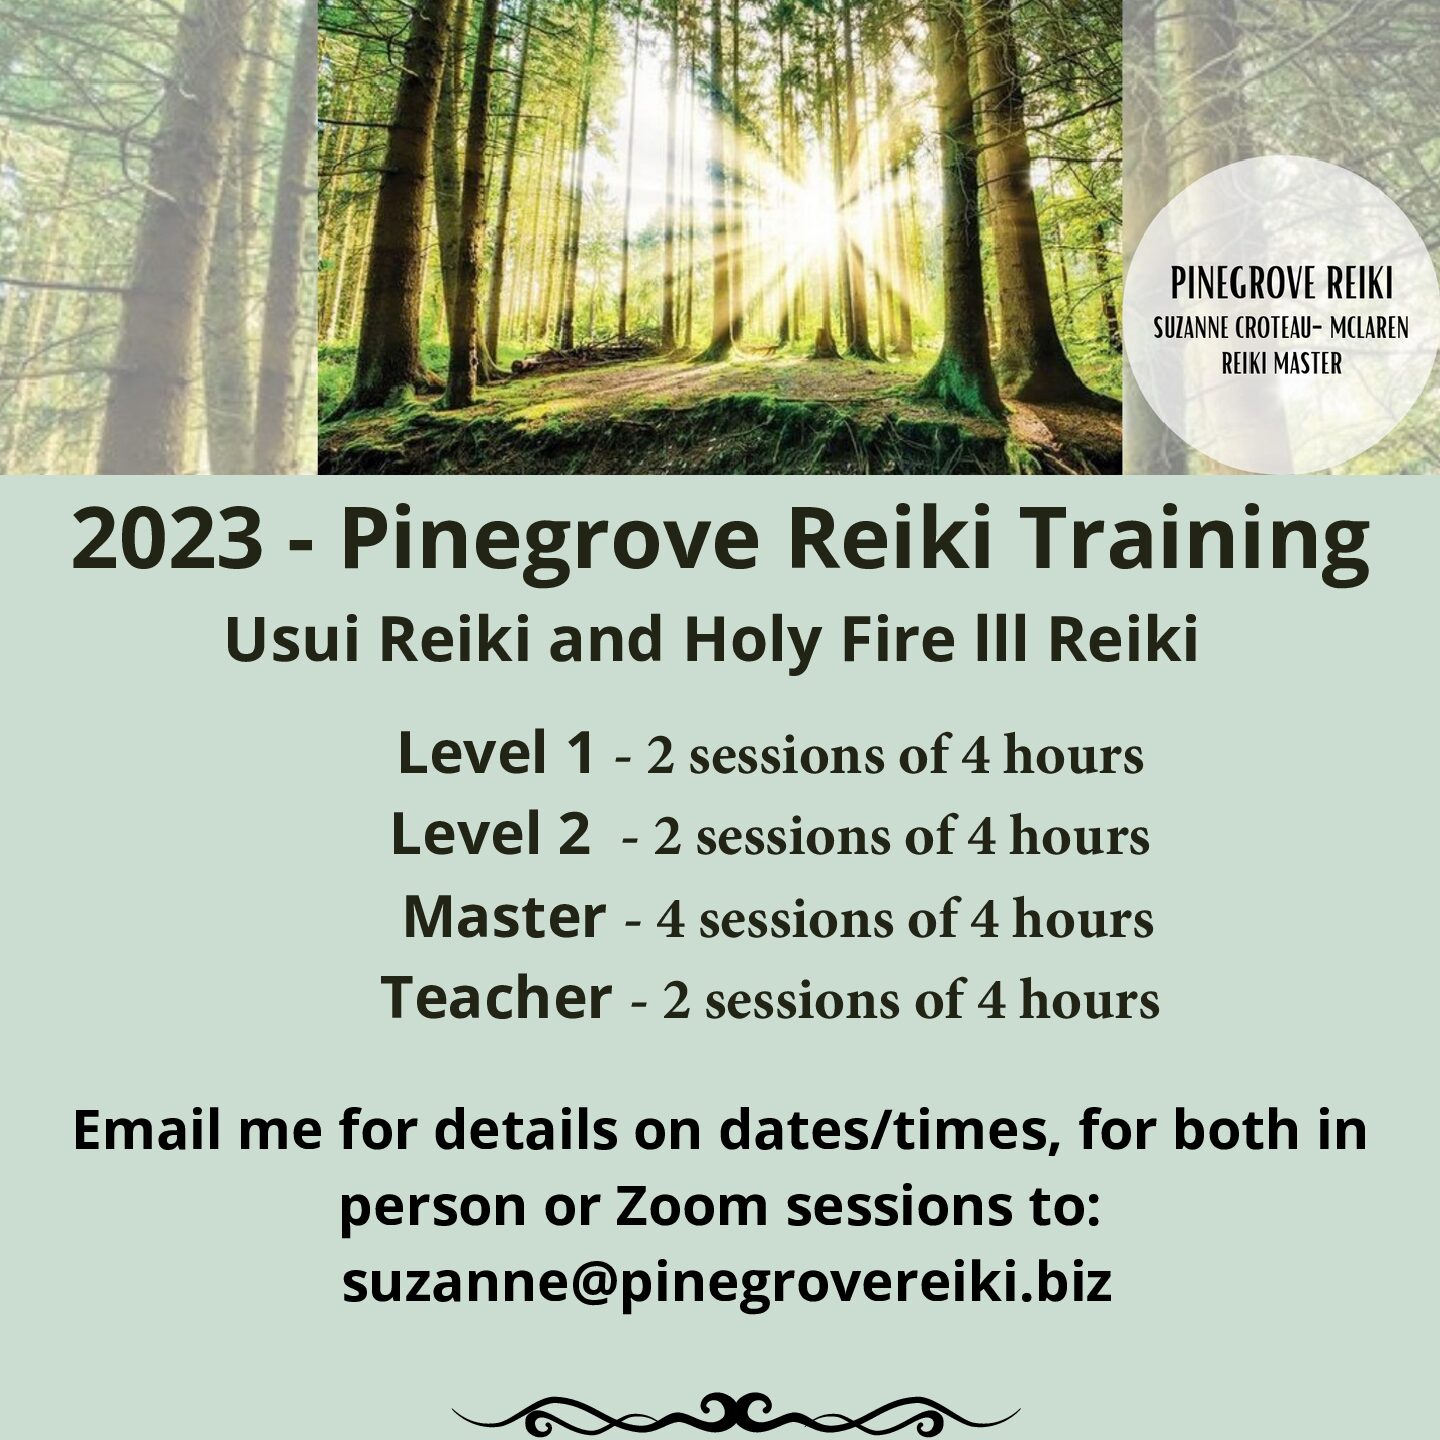  REIKI TRAINING-Connect with Suzanne Croteau to choose your class and dates